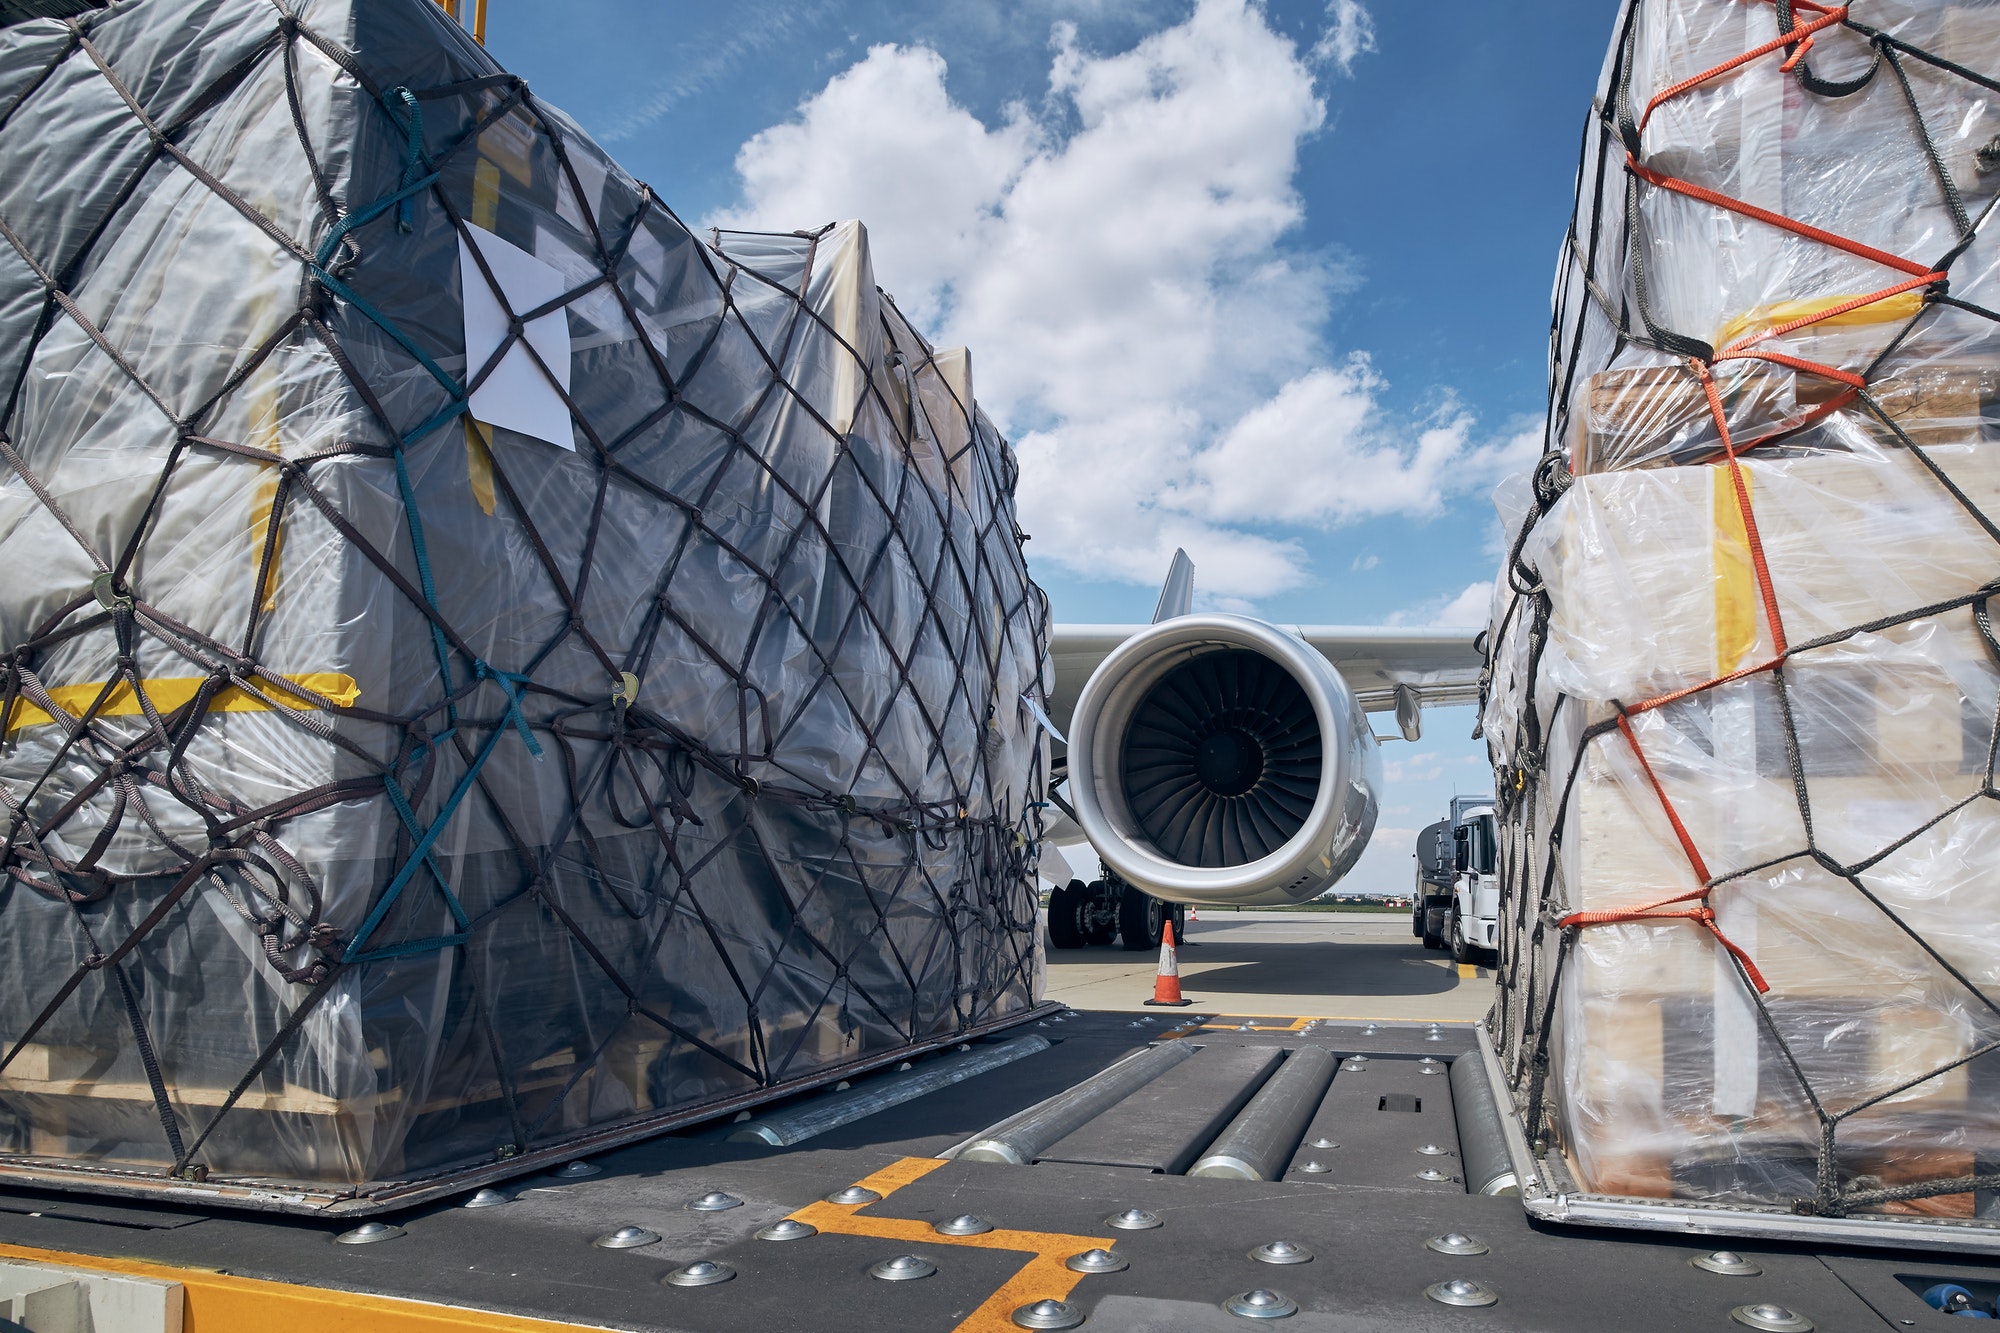 loading-of-cargo-containers-to-airplane.jpg